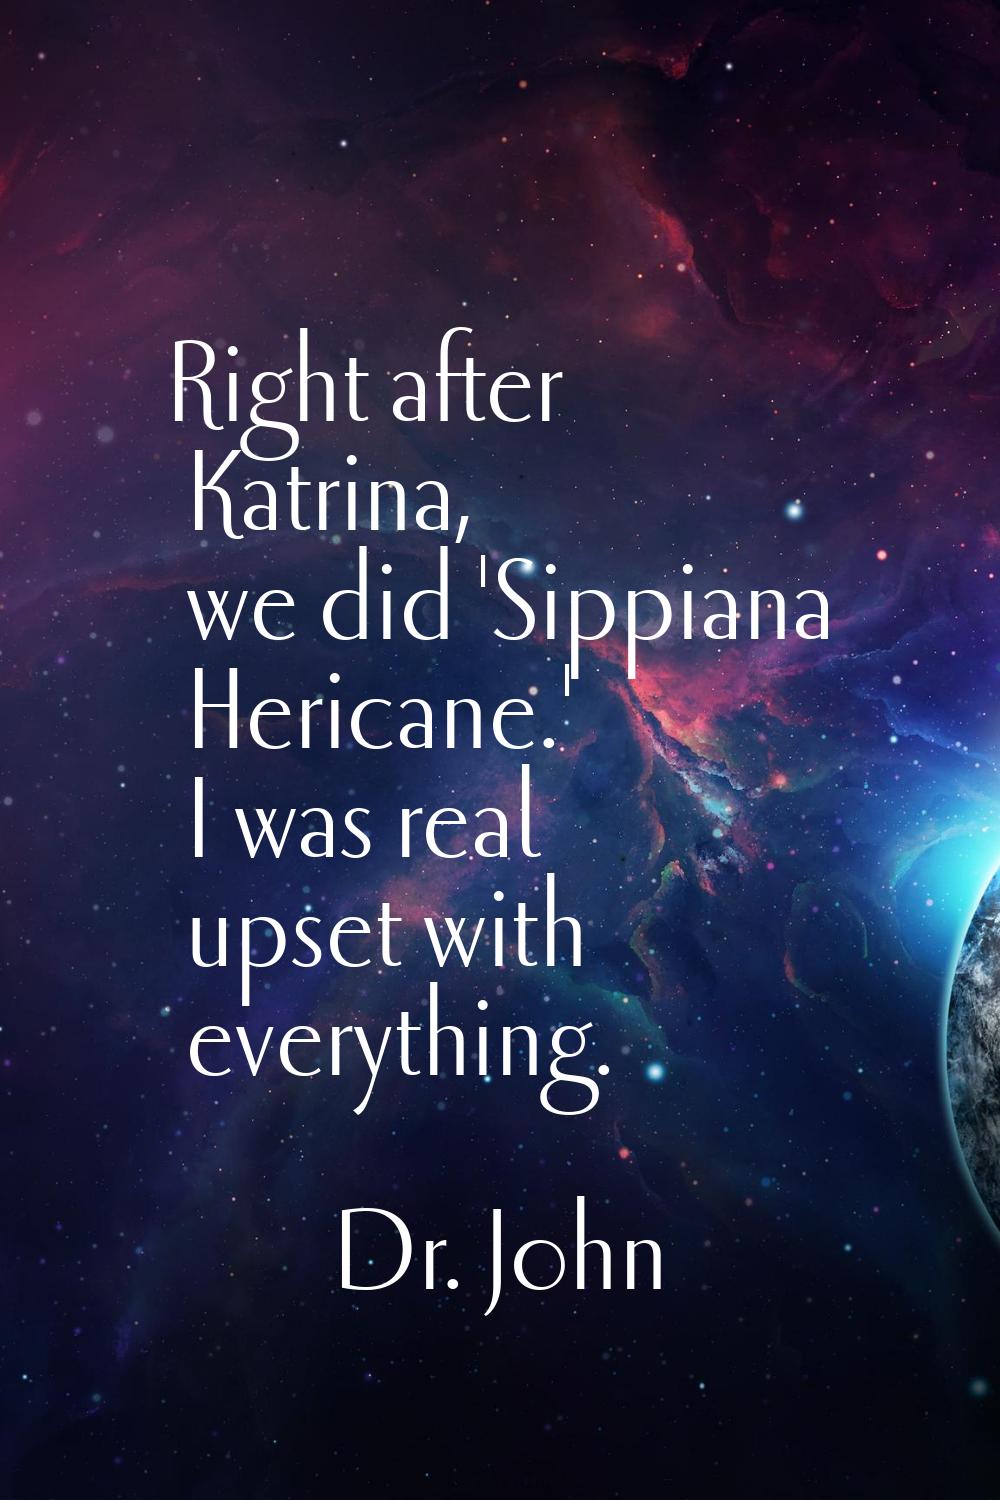 Right after Katrina, we did 'Sippiana Hericane.' I was real upset with everything.